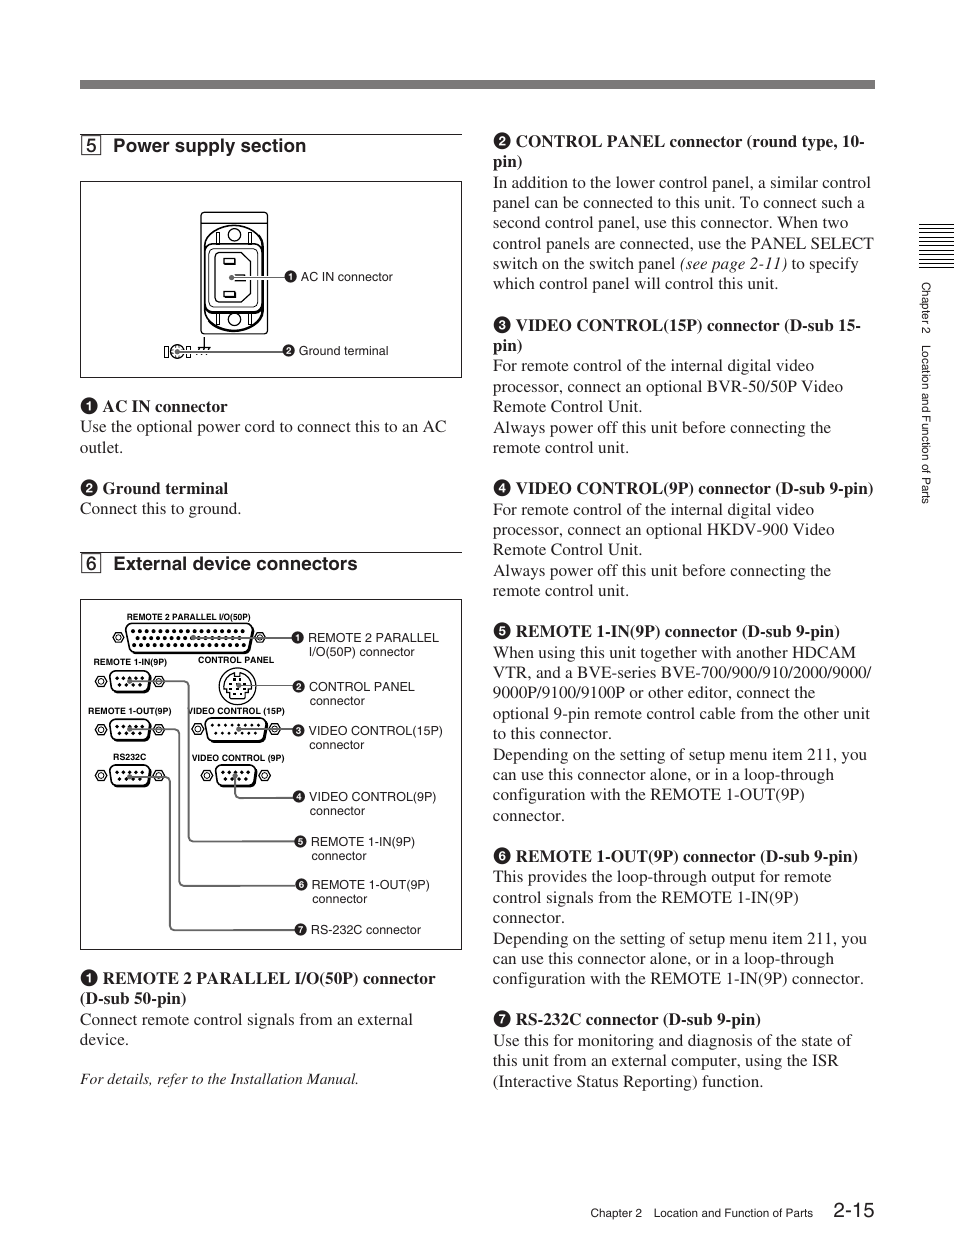 6 external device connectors | Sony HDW-M2100 User Manual | Page 23 / 115